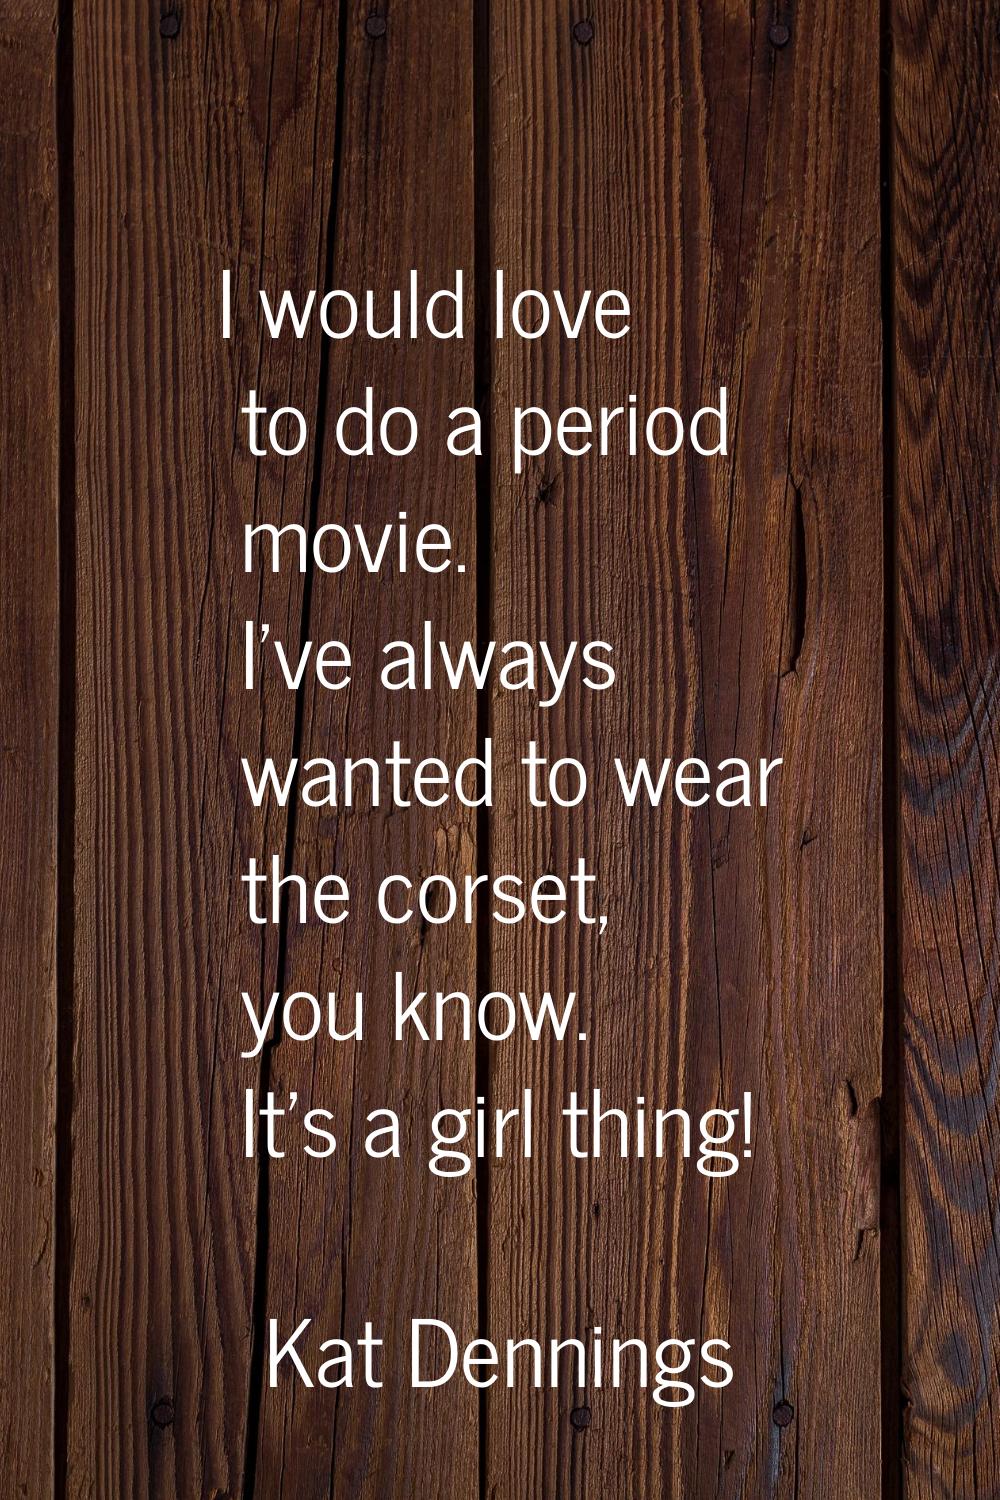 I would love to do a period movie. I've always wanted to wear the corset, you know. It's a girl thi